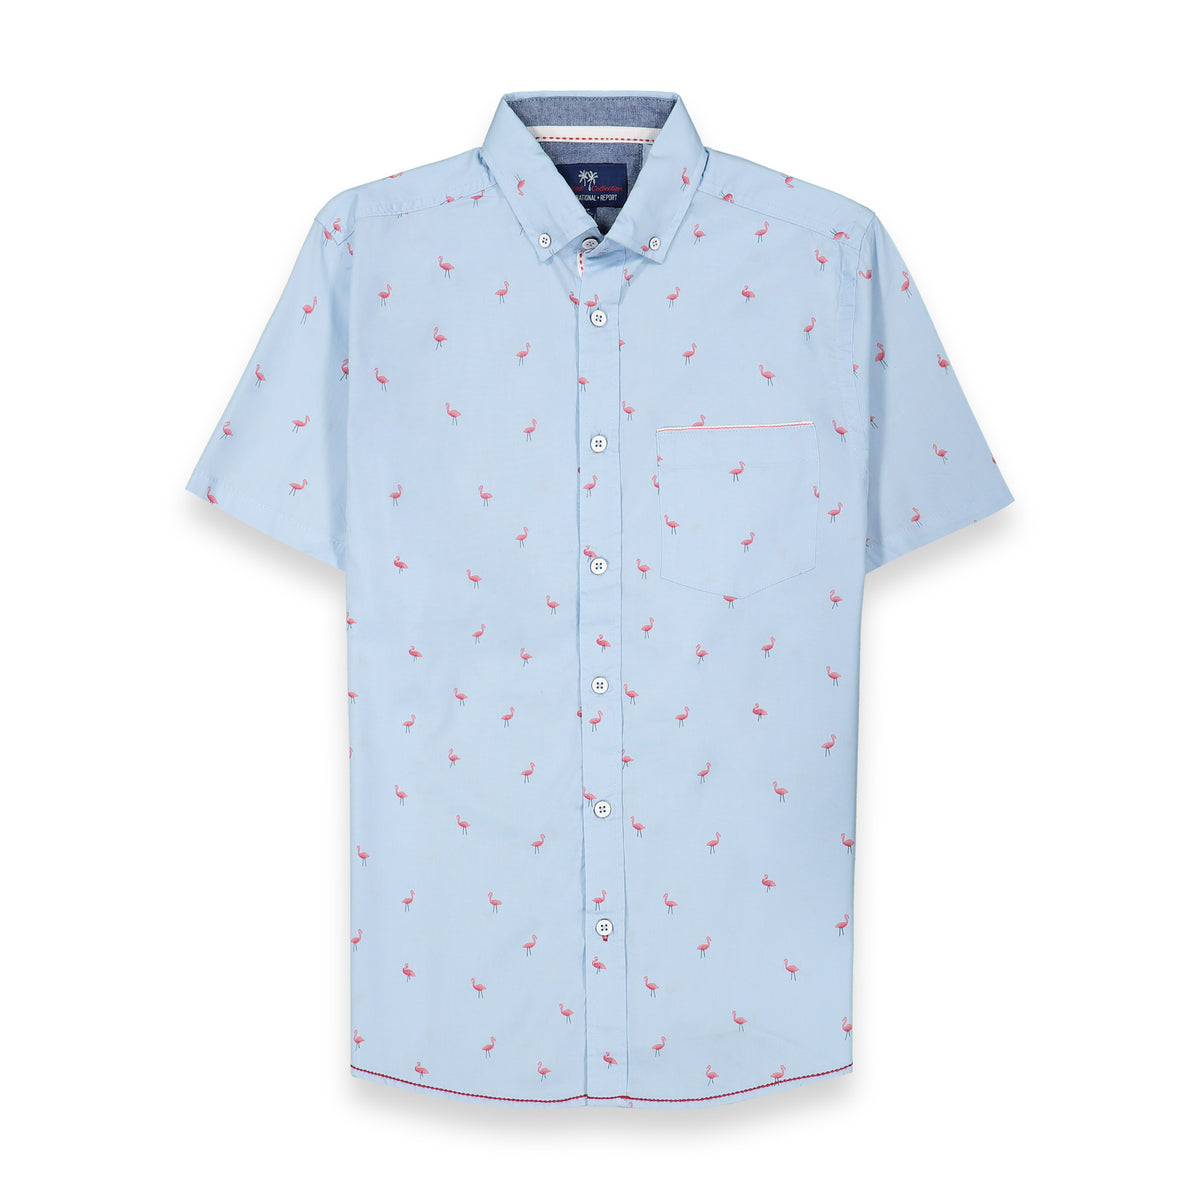 Front View of Short Sleeve Shirt with Flamingo Print in Blue